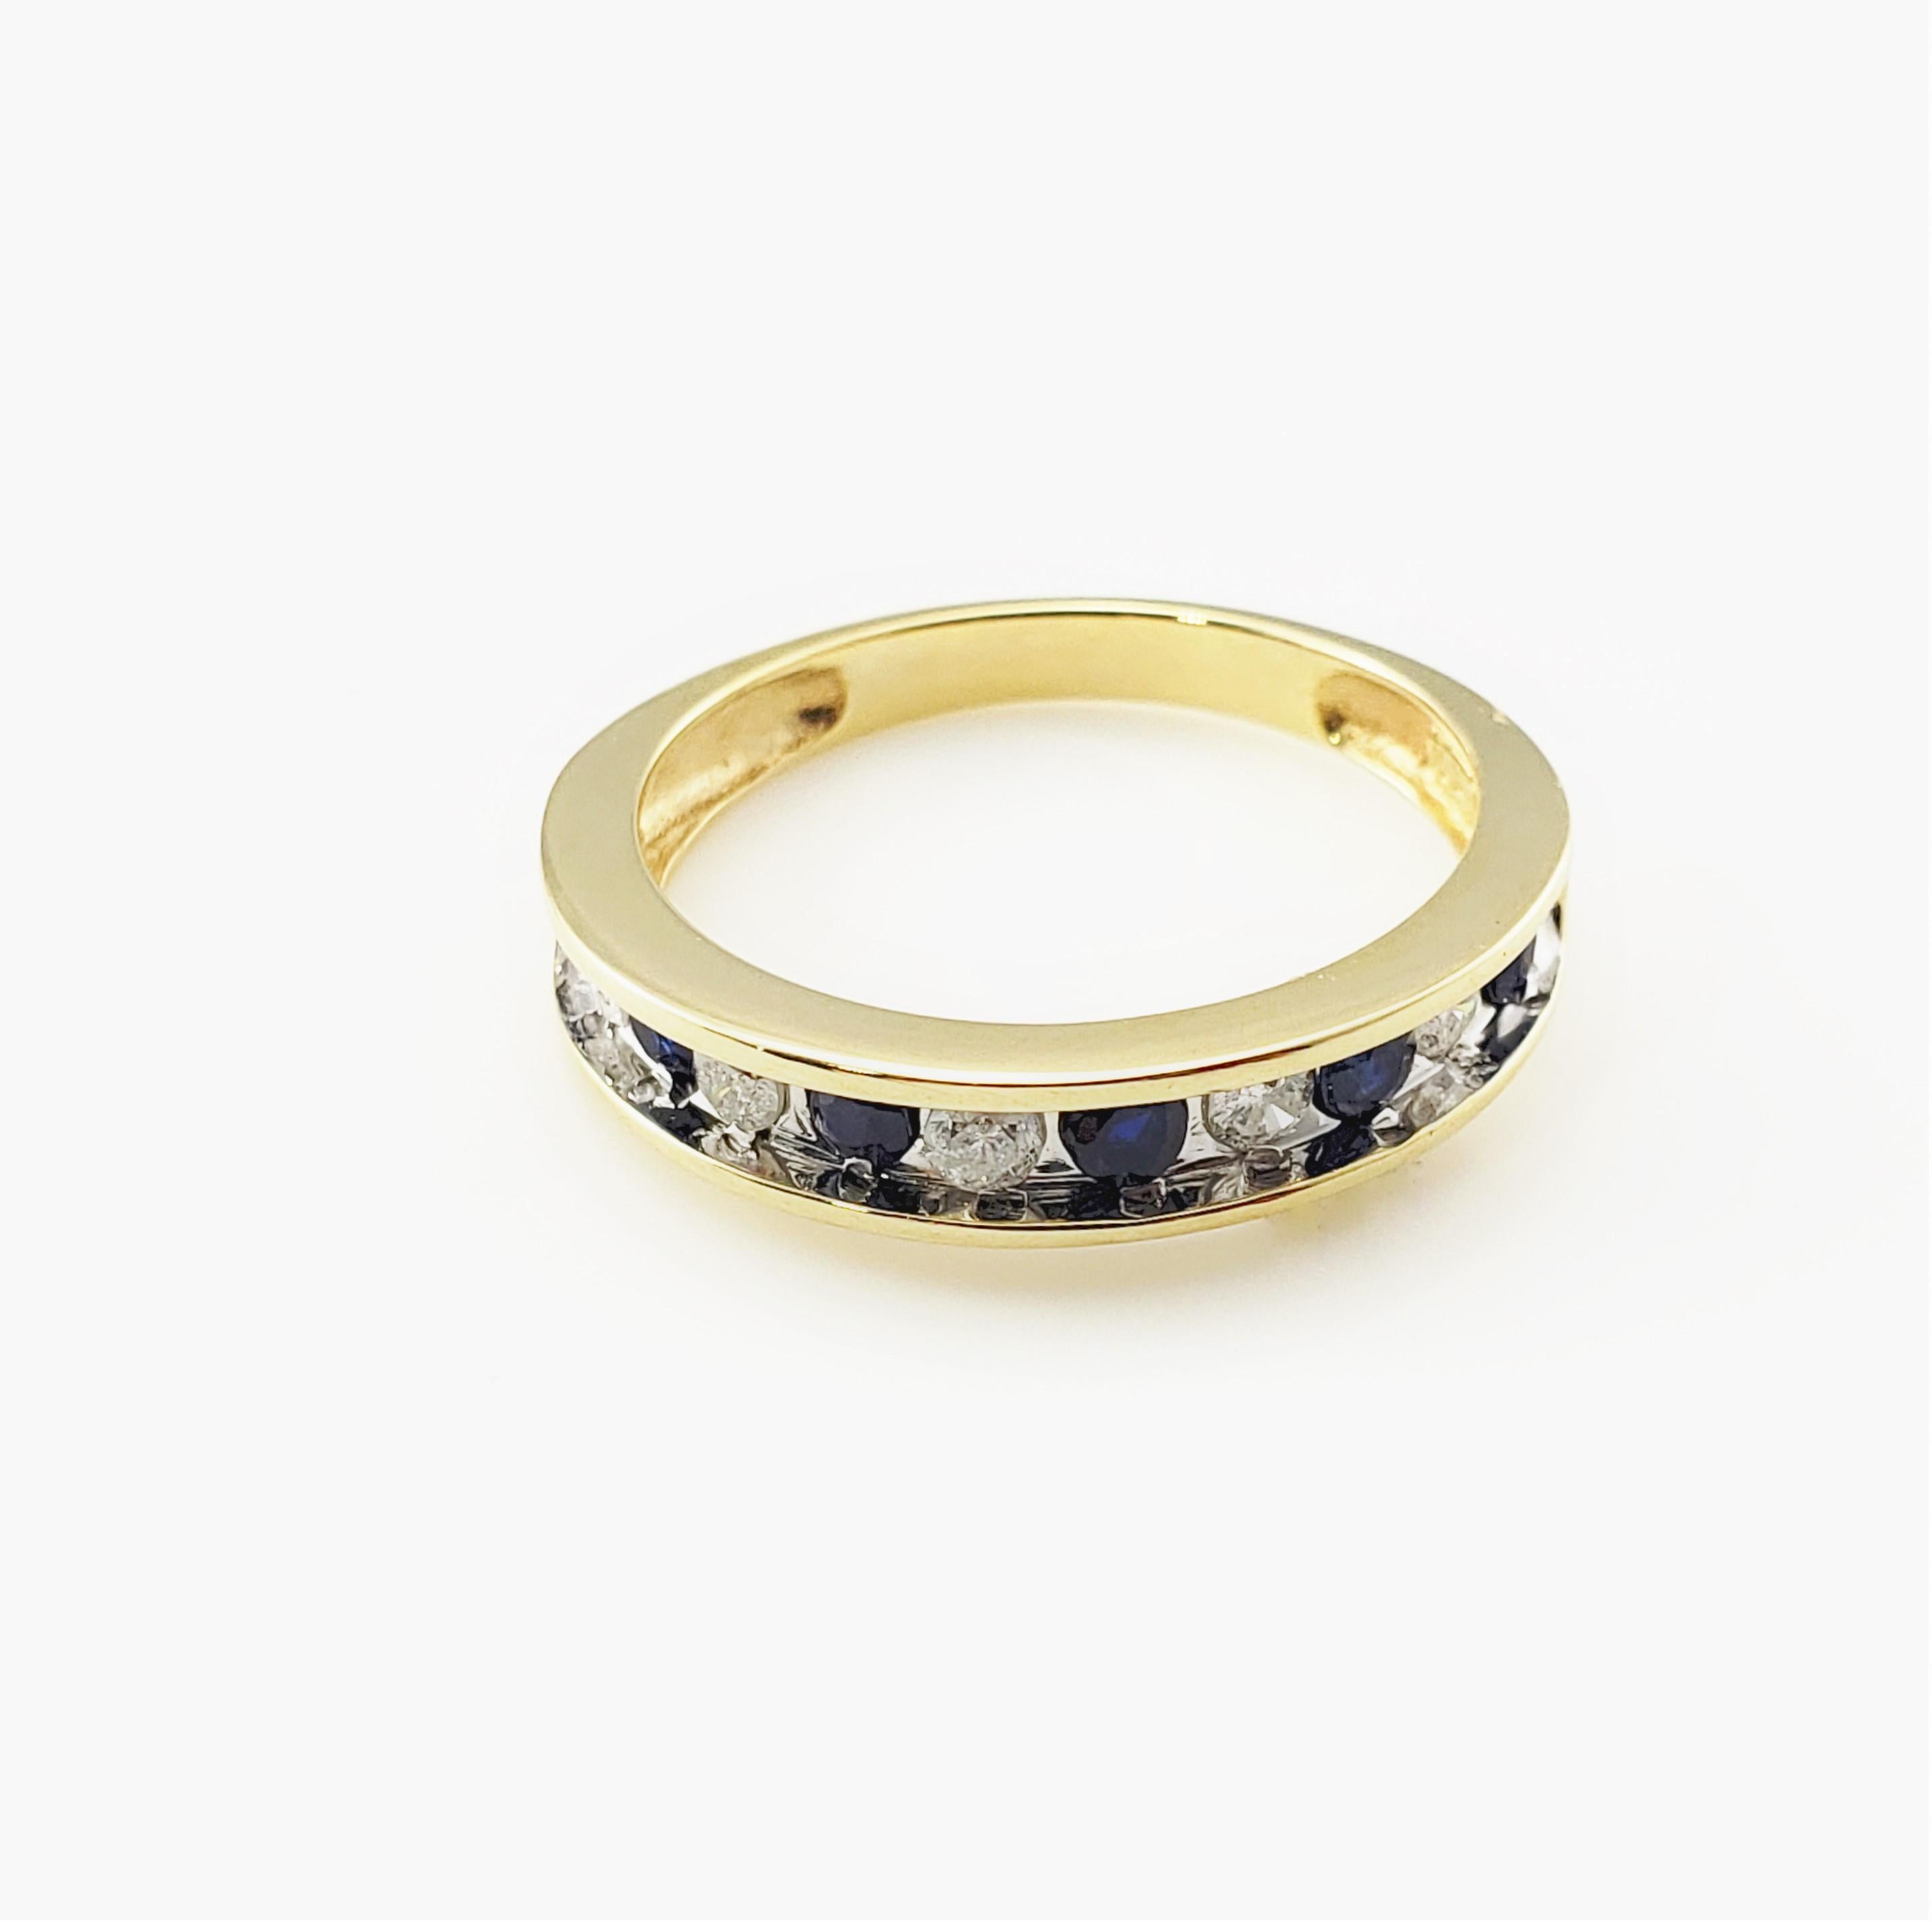 10 Karat Yellow Gold Sapphire and Diamond Ring Size 6.5-

This lovely band features five round brilliant cut diamonds and six blue sapphires set in classic 10K yellow gold.  Width:  4 mm 
Shank:  2 mm.

Approximate total diamond weight:  .20